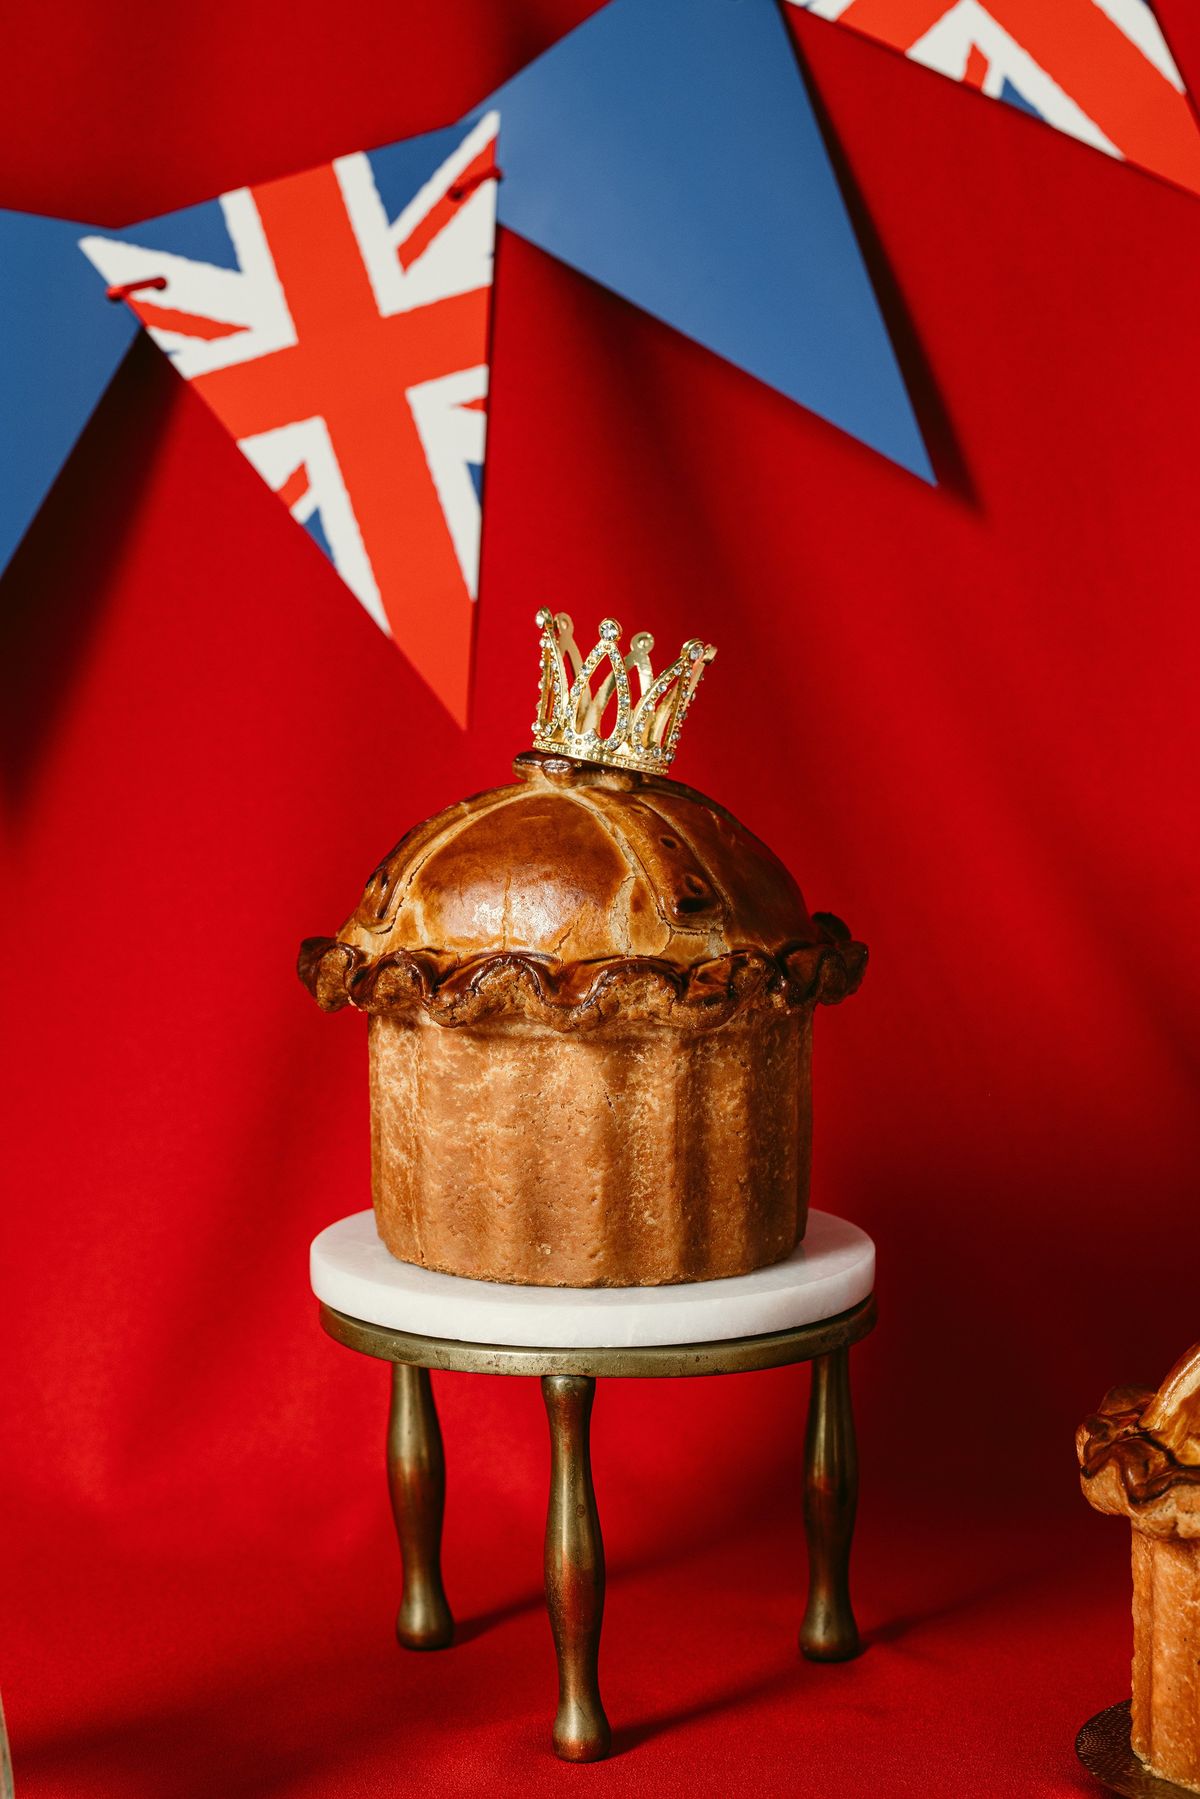 The limited-edition Crown Jewel Celebration Pork Pie, created by the British chef Calum Franklin in collaboration with the pie maker Dickinson & Morris in London on April 24, 2023. A careful eater and a champion of organic farming, King Charles III has a potent pulpit for changing the national diet – though that royal quiche has met some resistance.  (New York Times)